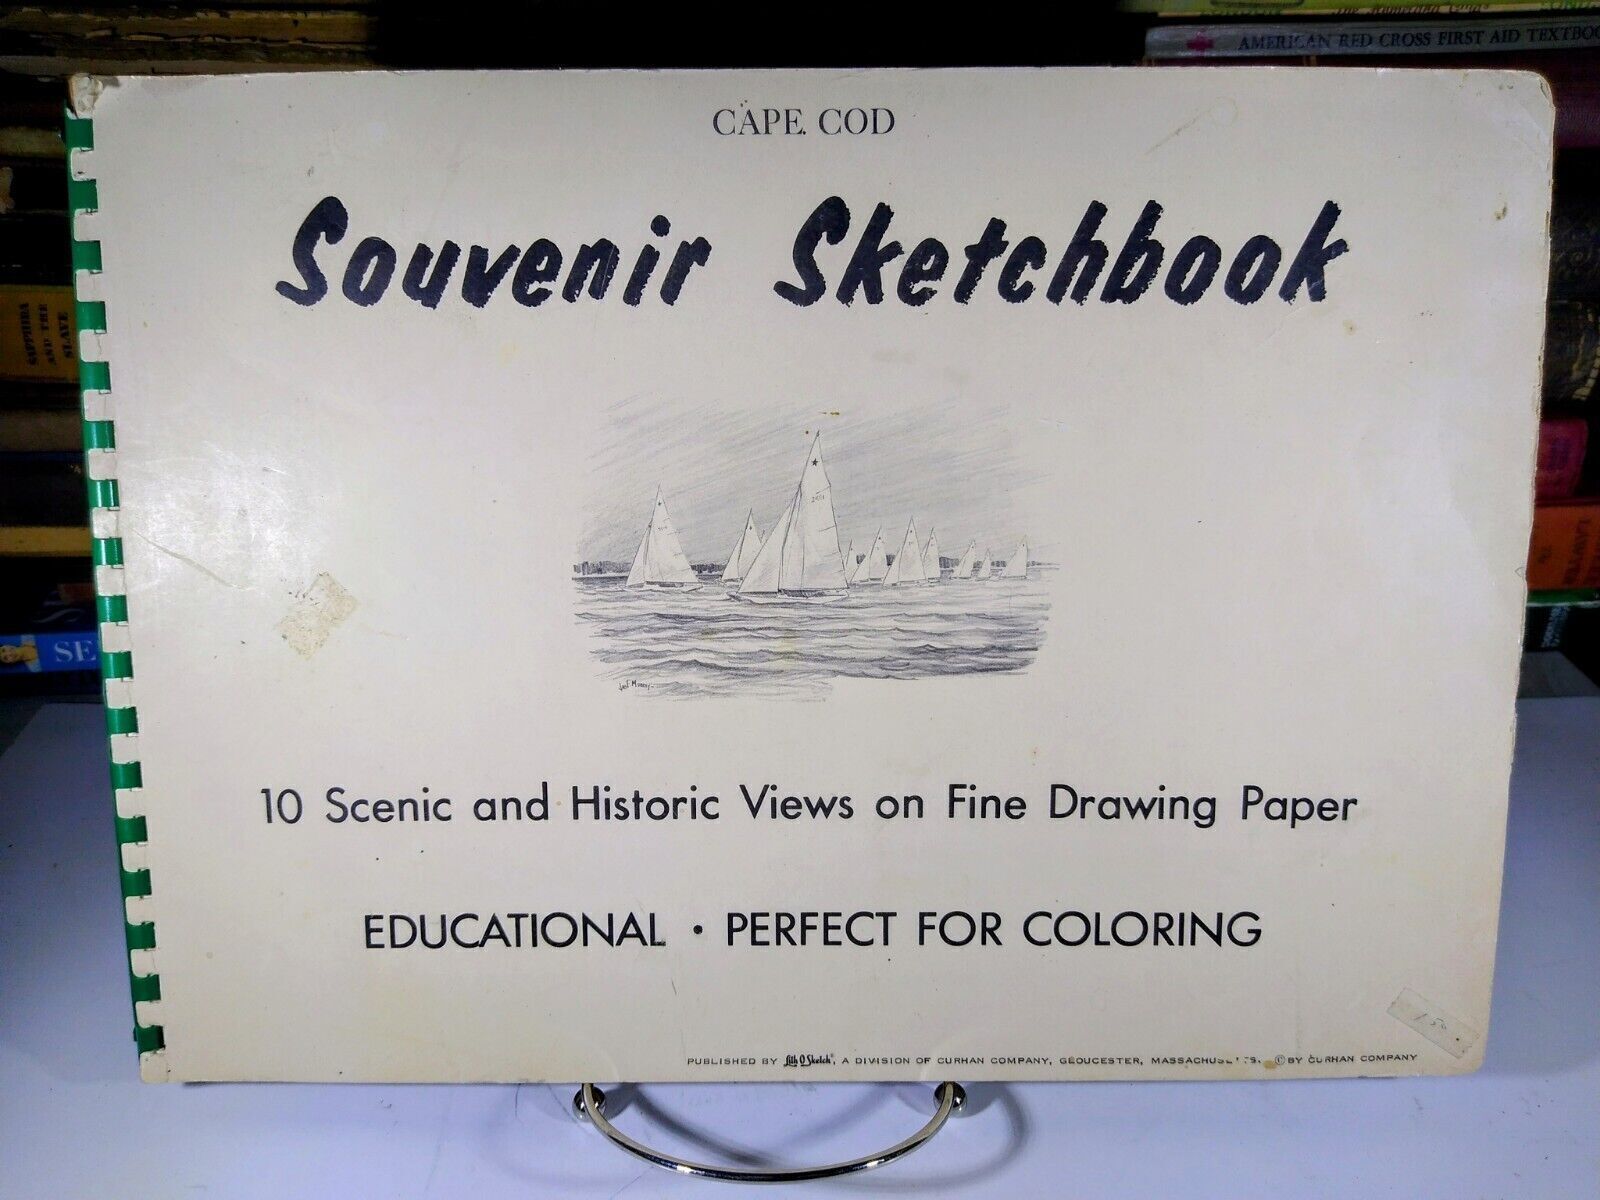 Cape Cod Souvenir SketchBook, 10 Scenic And Historic Views On Fine Drawing Paper